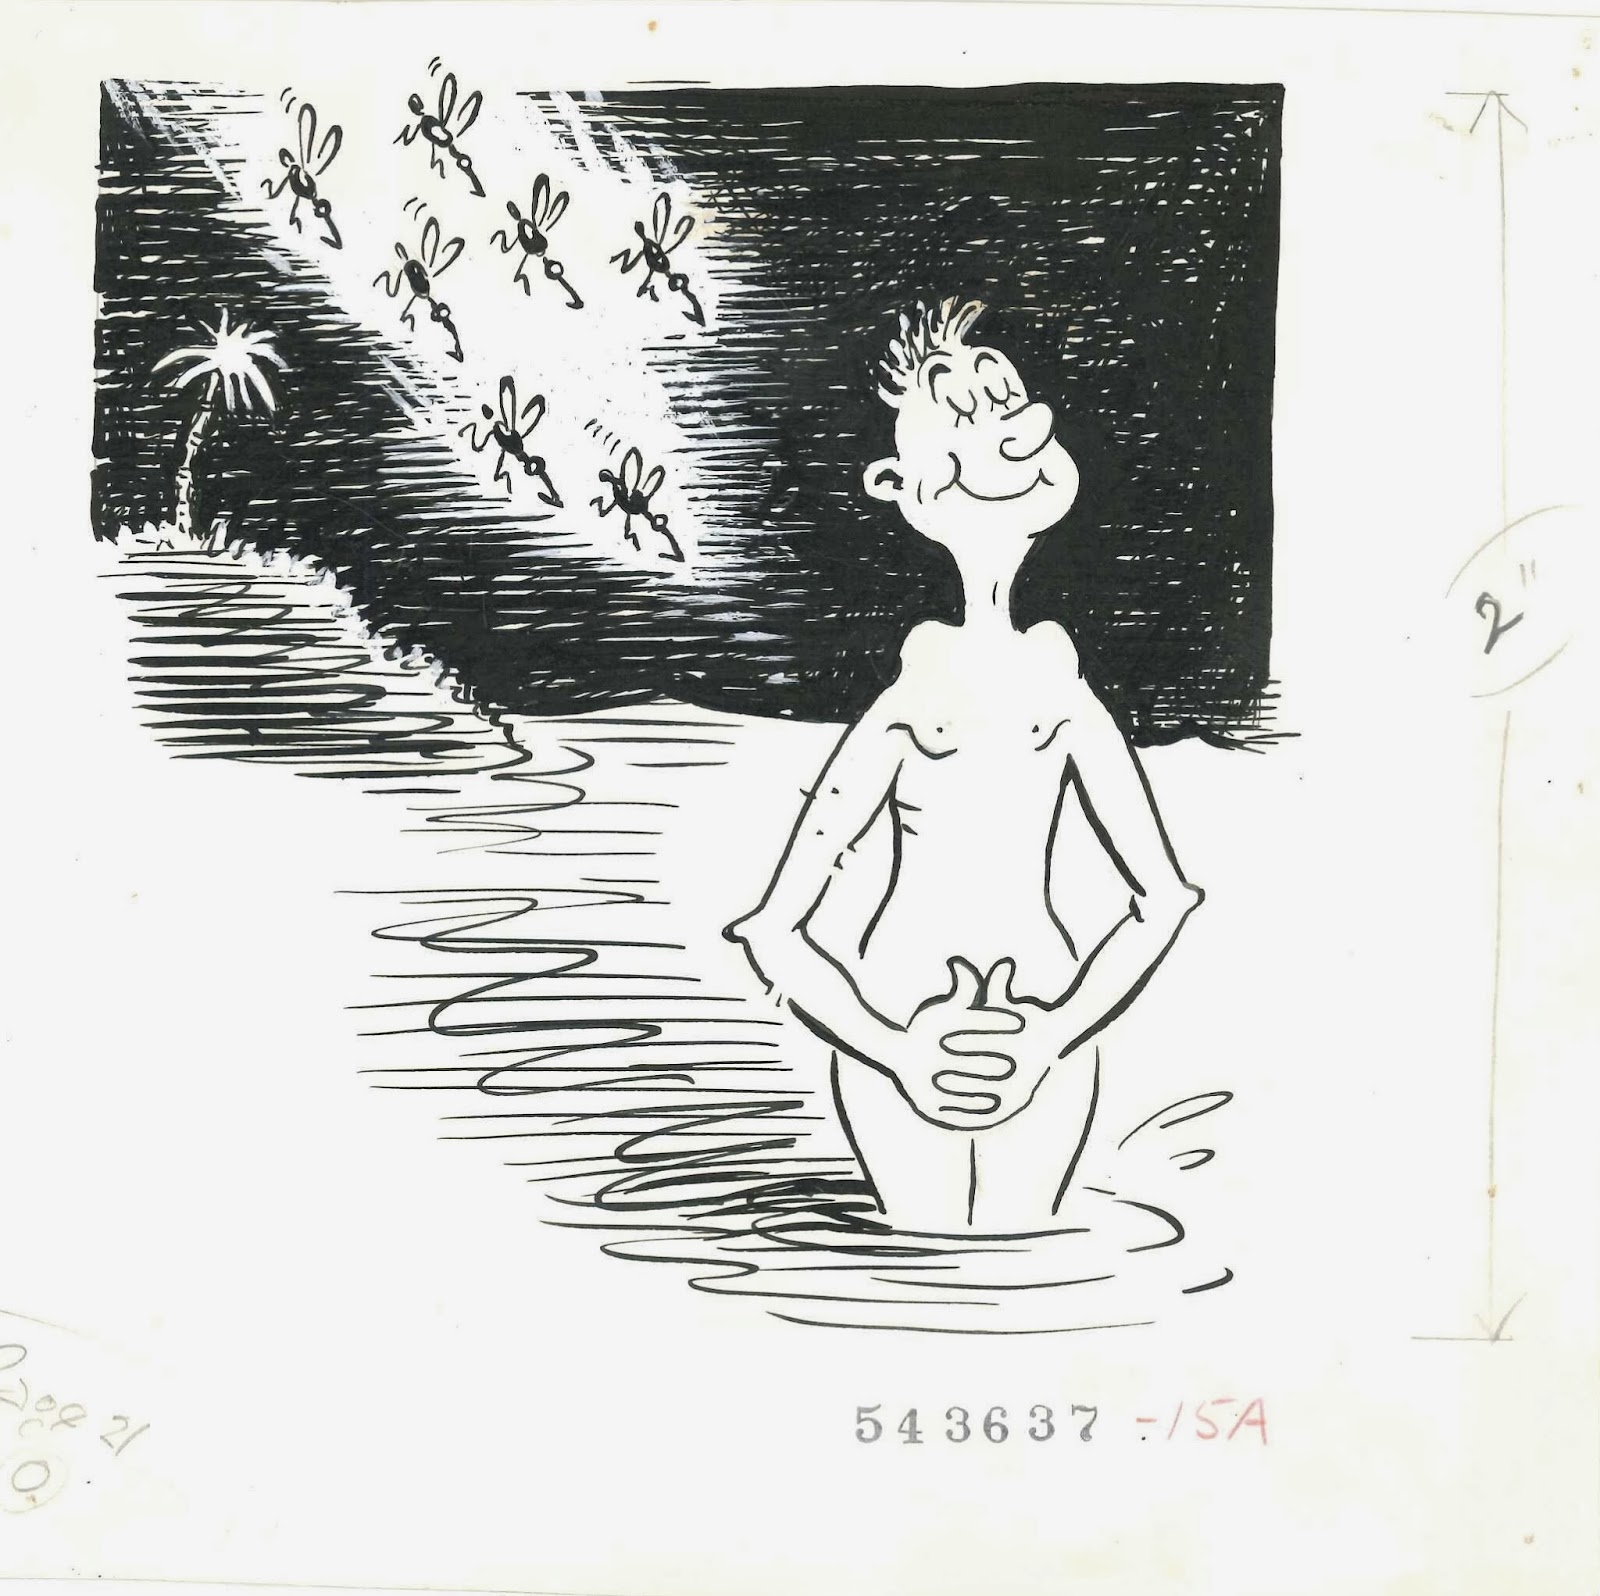 A Geisel illustration of a cloud of mosquitos diving towards a nude man standing obliviously in a lake.